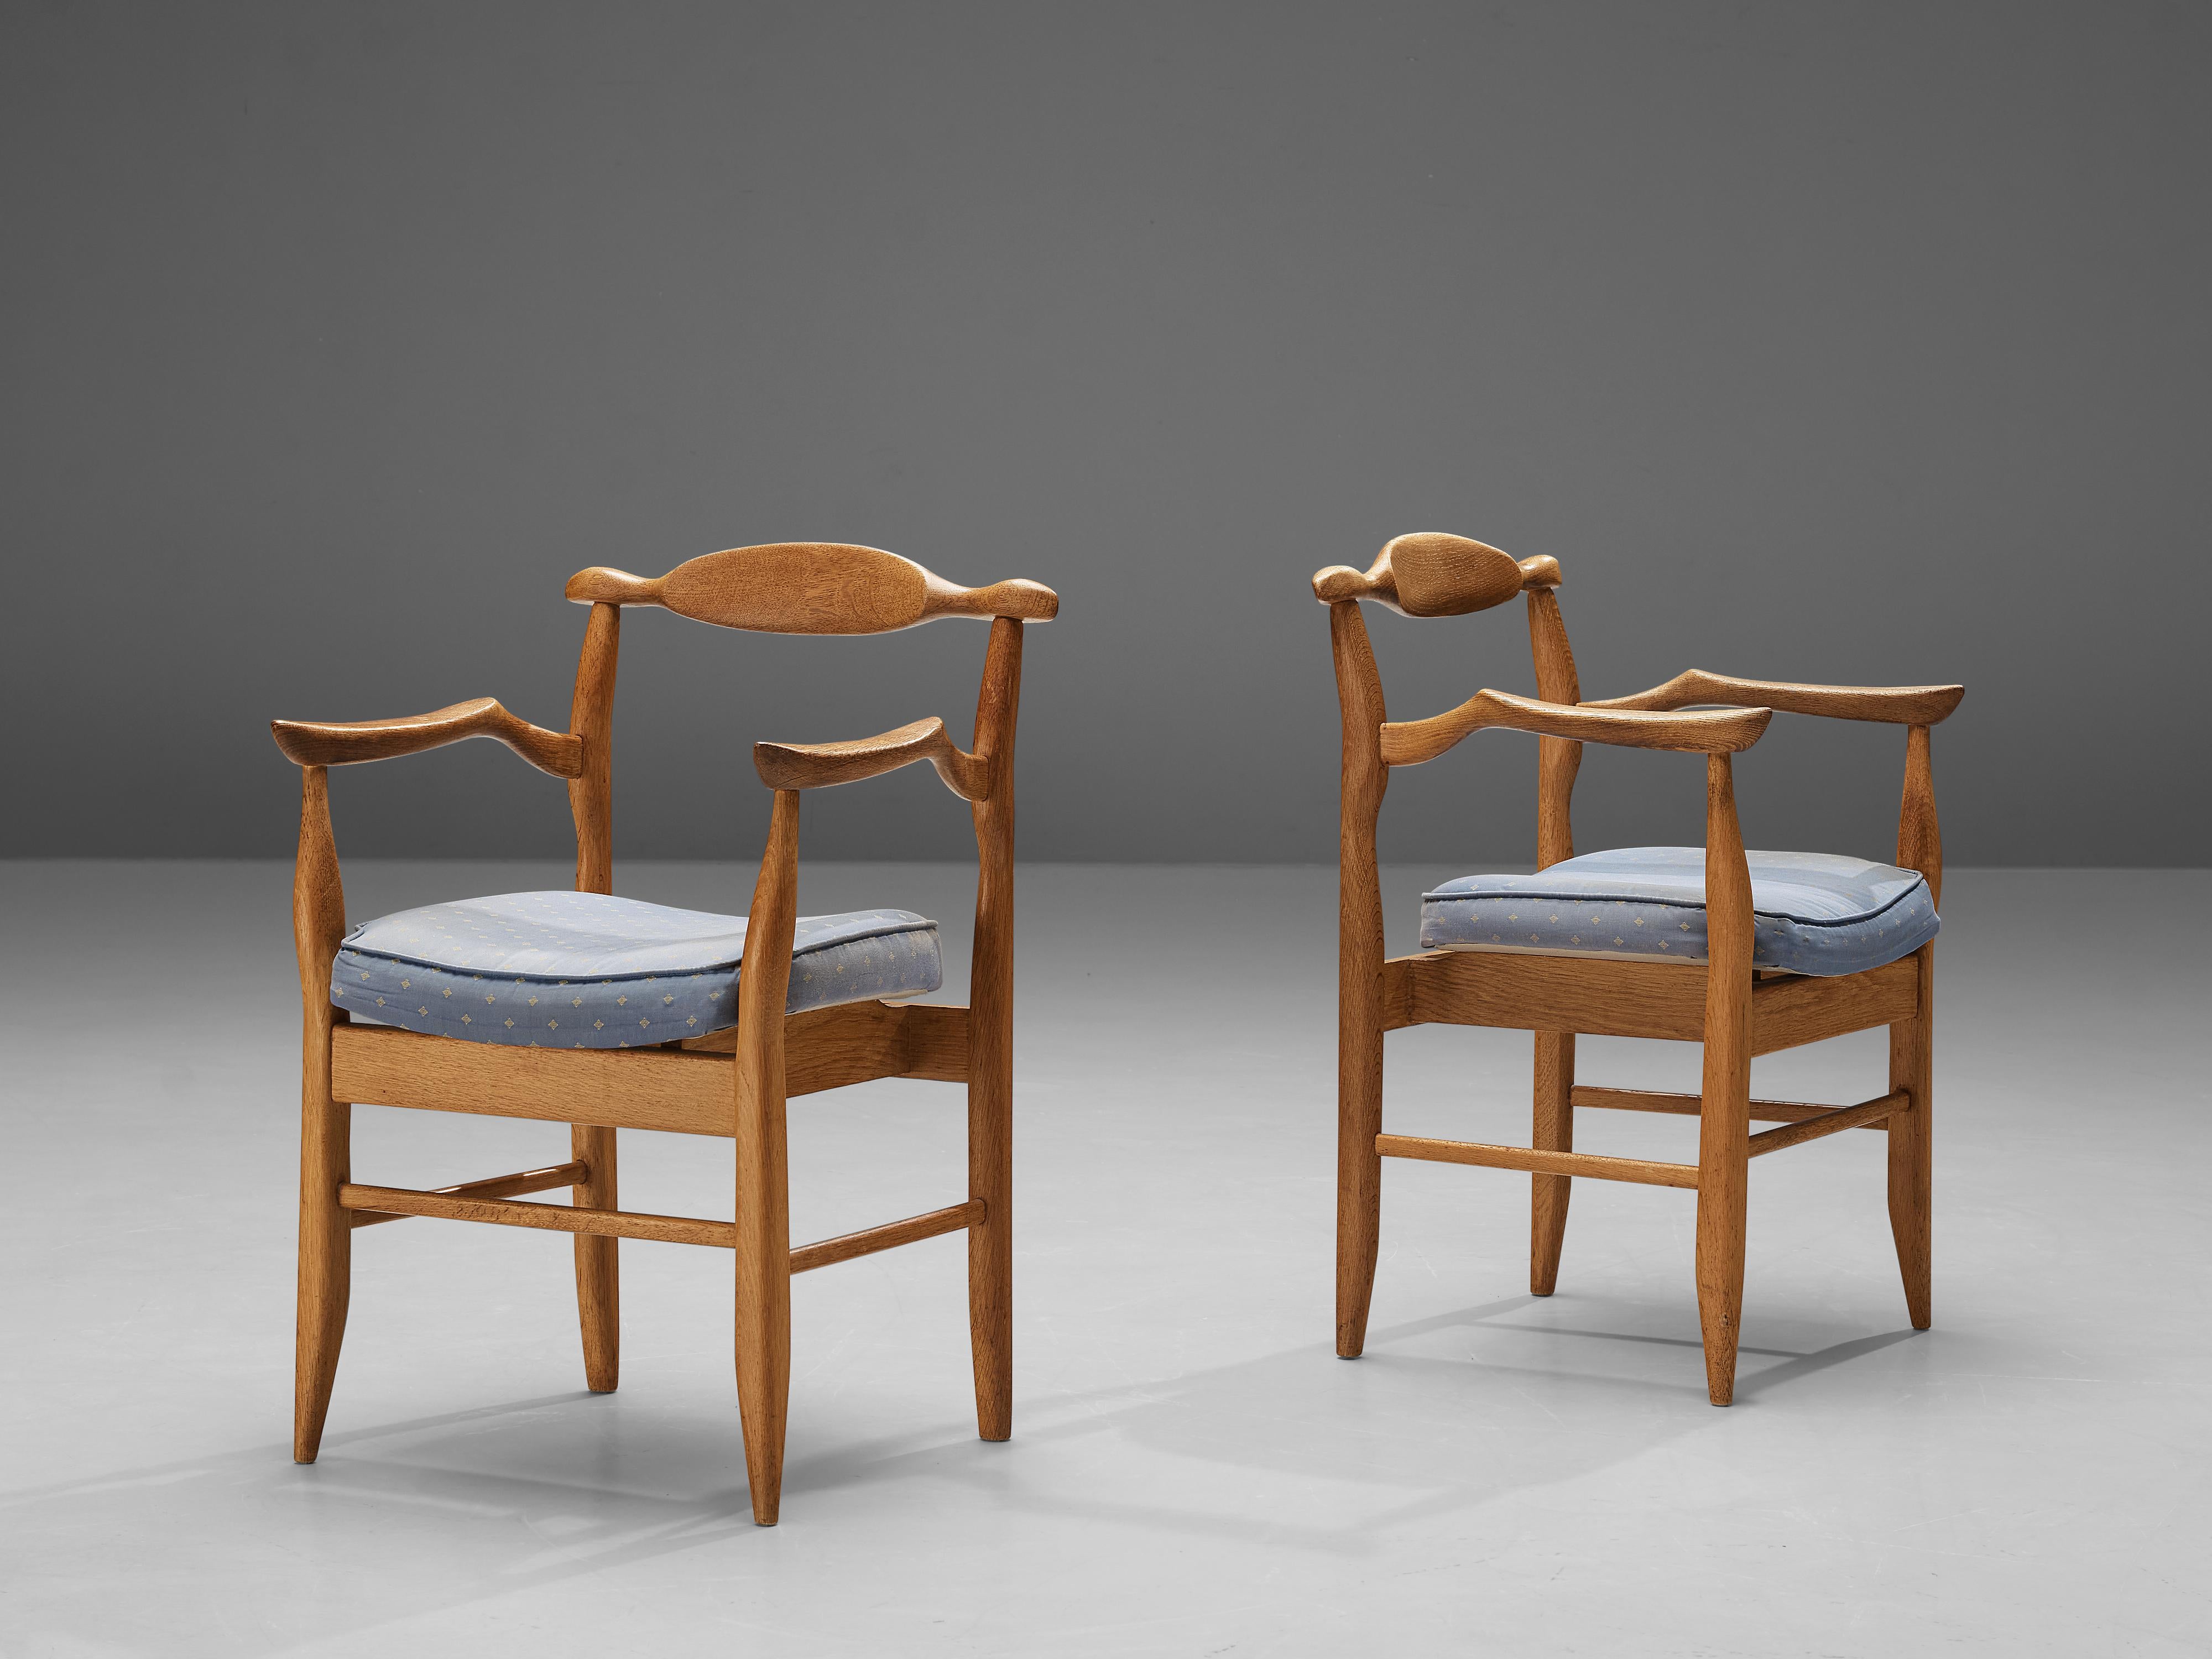 Guillerme & Chambron for Votre Maison, pair of armchairs ‘Fumay’, oak, fabric upholstery, France, 1960s.

Pair of armchairs Guillerme and Chambron. These chairs show the characteristic frame of this French designer duo. Tapered legs and the